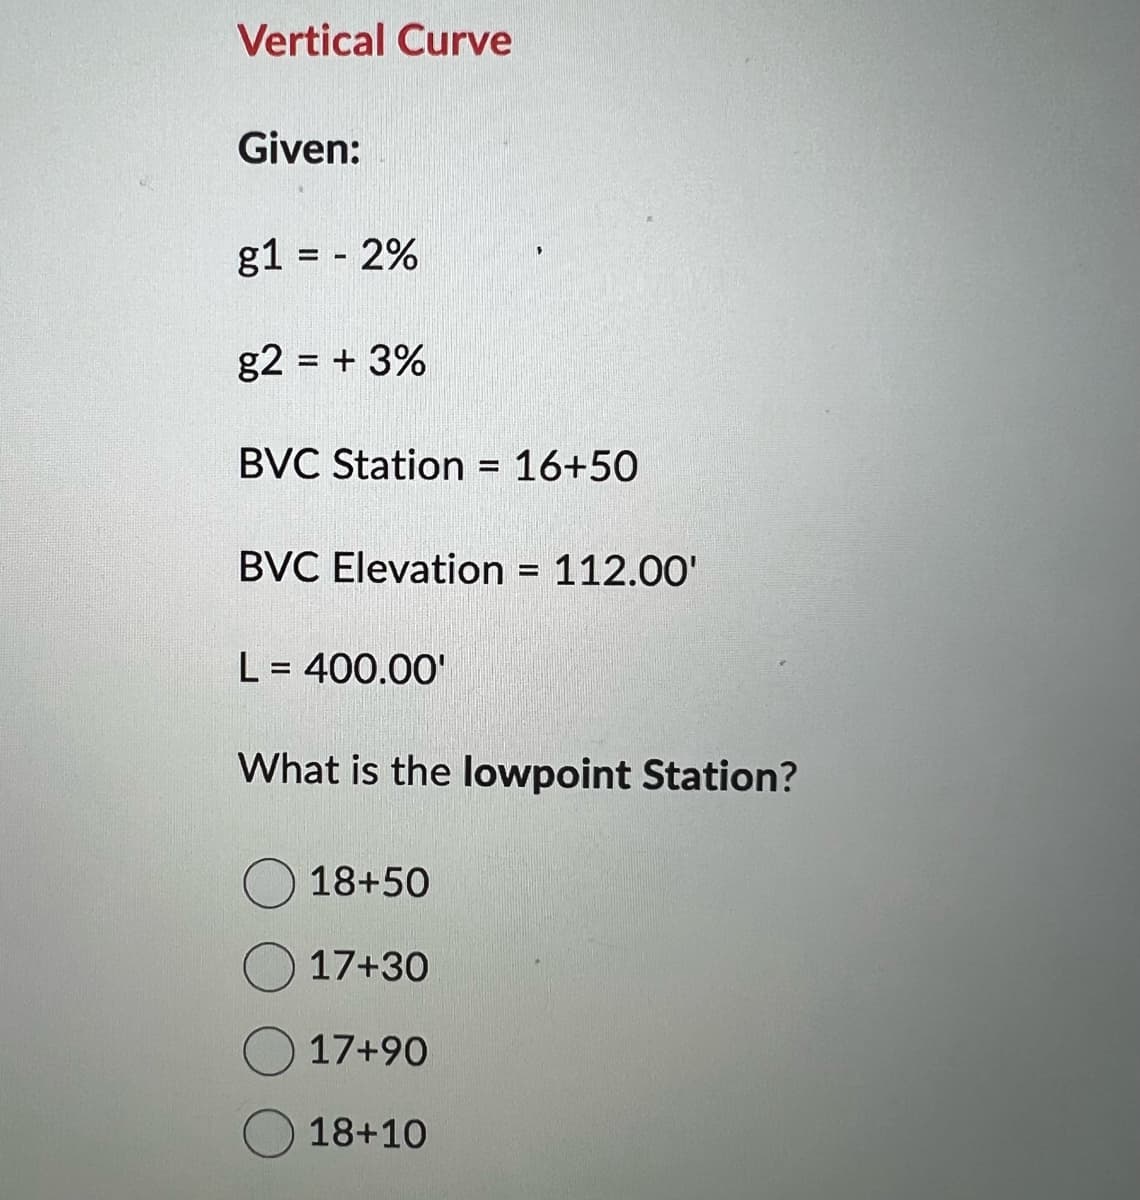 Vertical Curve
Given:
g1 = - 2%
g2 = + 3%
BVC Station = 16+50
BVC Elevation = 112.00'
L = 400.00'
What is the lowpoint Station?
18+50
17+30
17+90
18+10